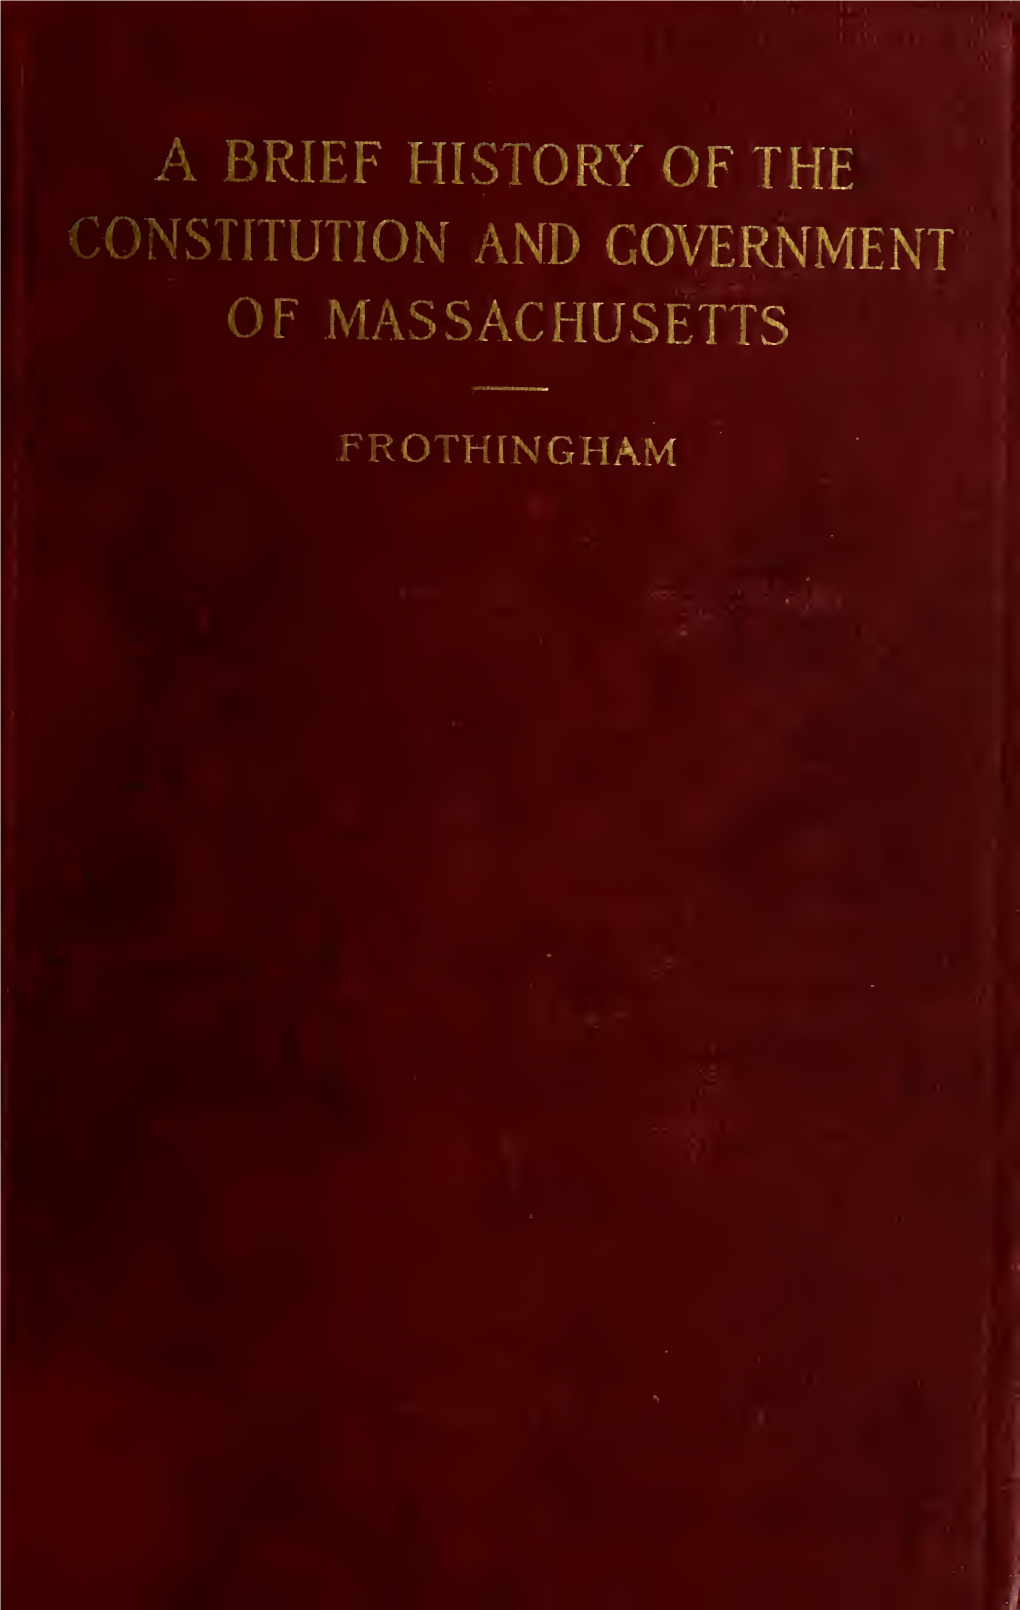 A Brief History of the Constitution and Government of Massachusetts